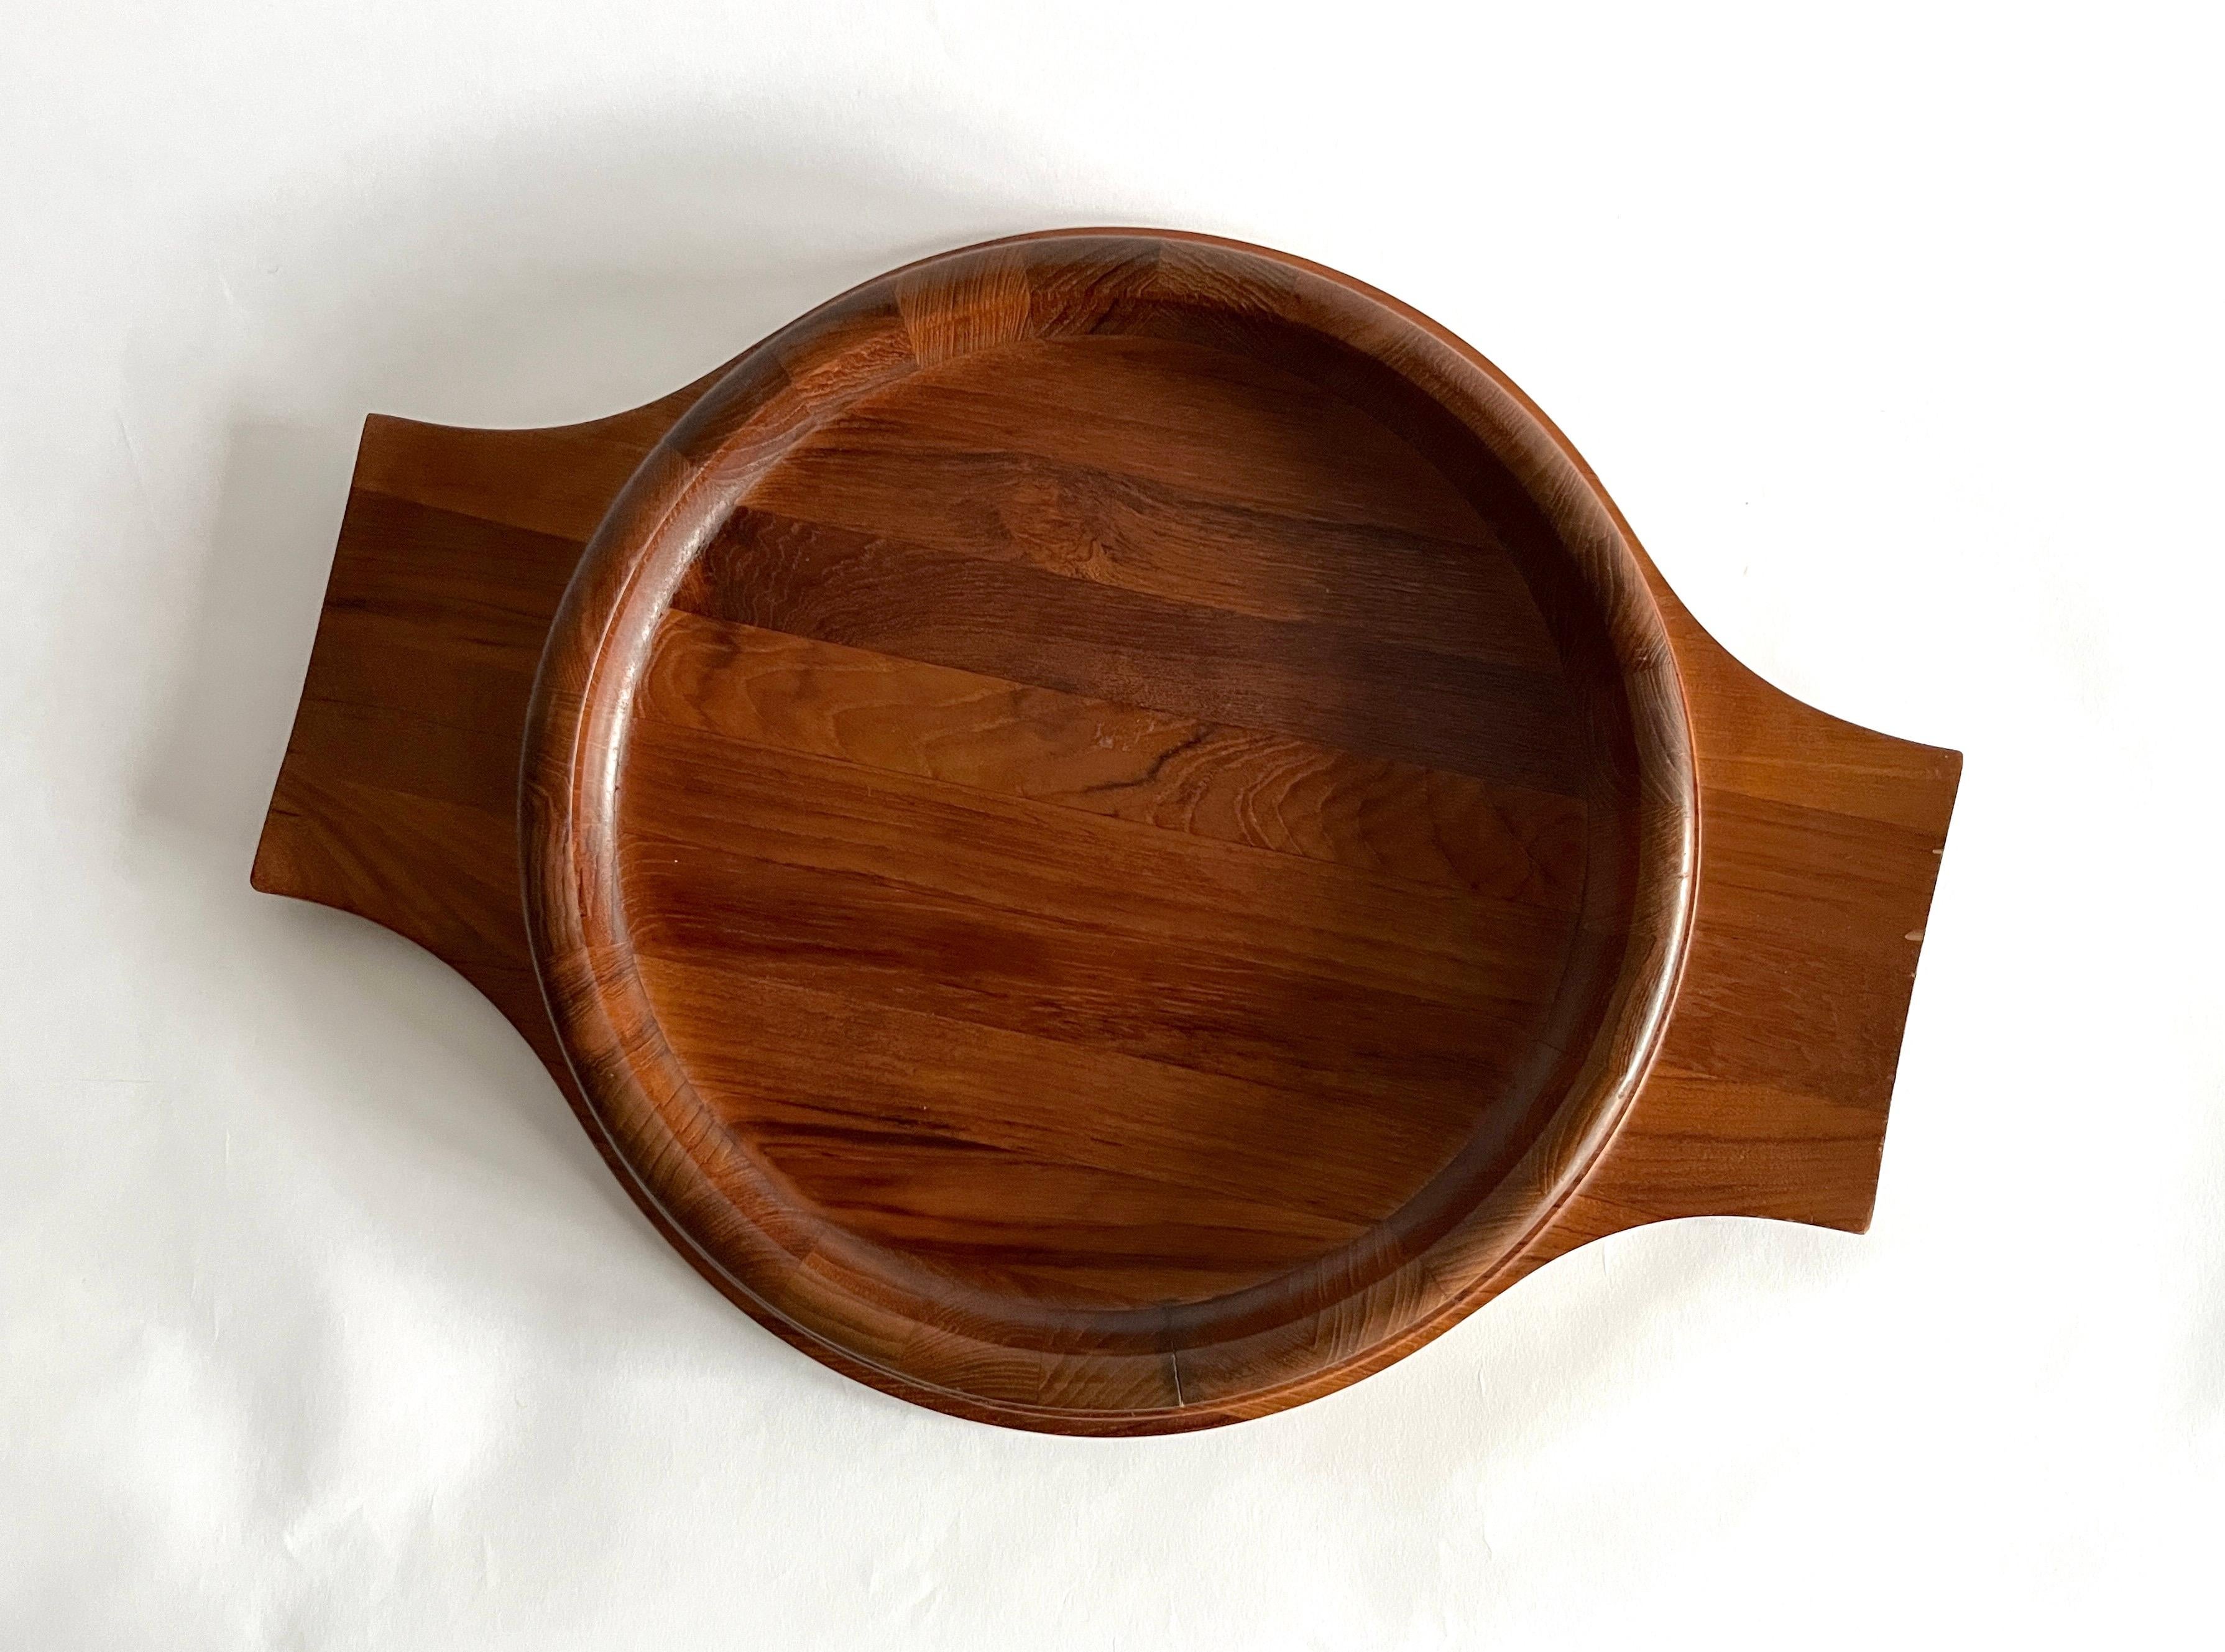 A truly hard-to-find matched set of Dansk Danish modern teak bowl and tray serveware designed by Jens Quistgaard. A very large handled serving tray is accompanied by a shallow serving bowl. The tray was made in Denmark and the bowl was made in